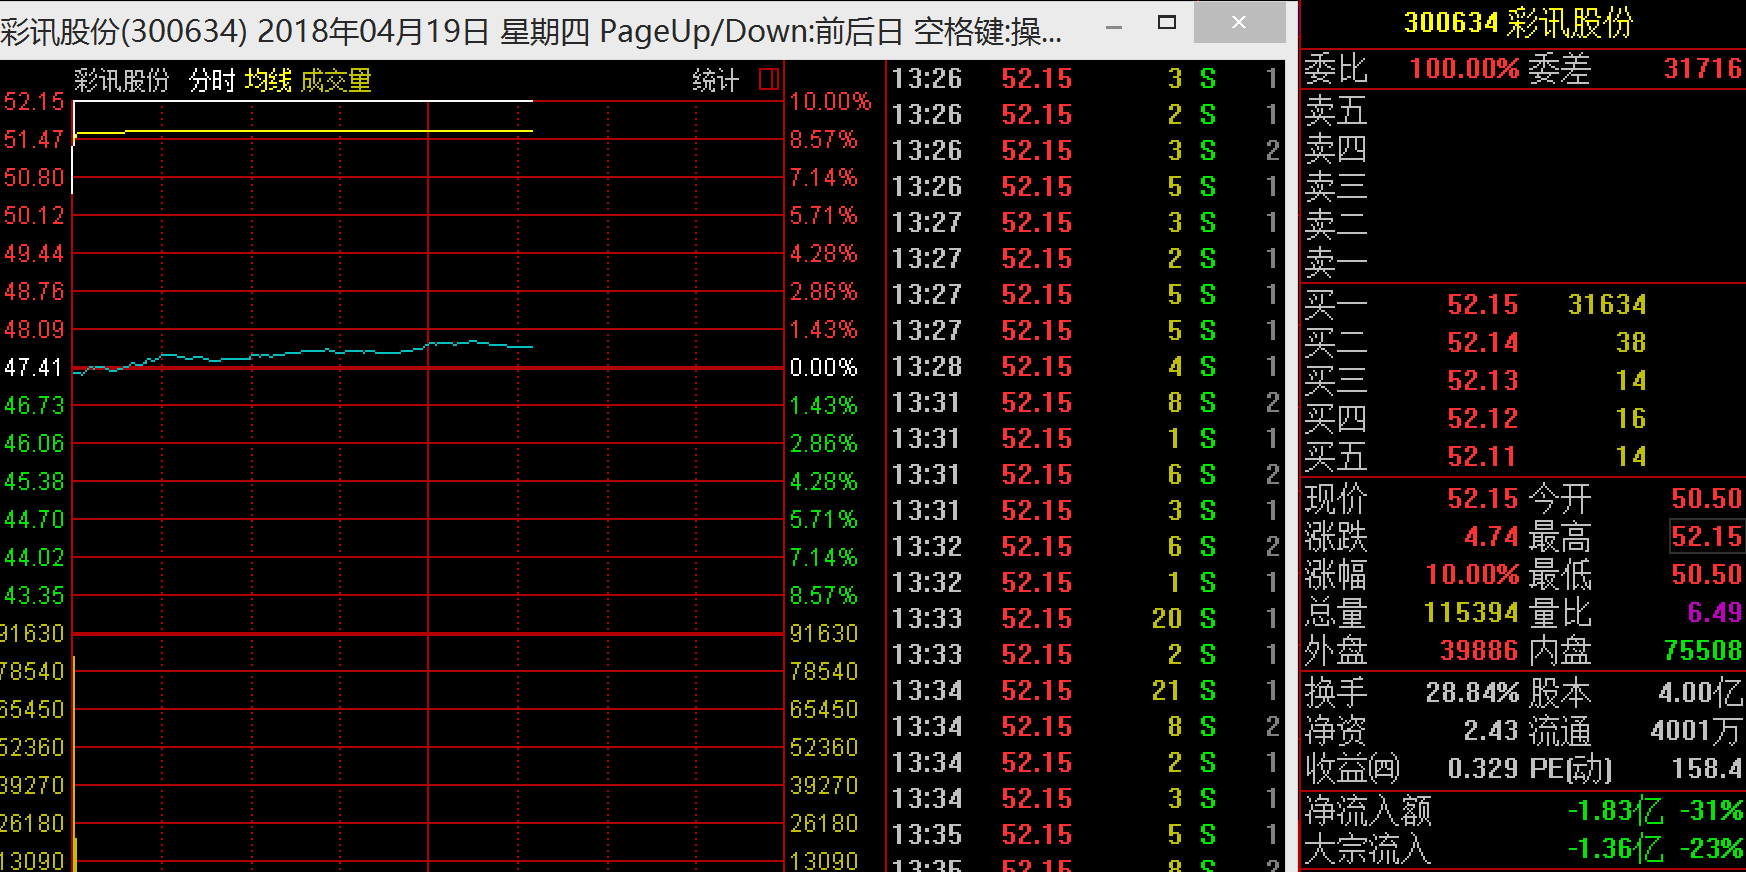 C:\Users\Administrator\AppData\Roaming\Tencent\Users449377\**\WinTemp\RichOleT4_@X5CLTR[YAQPFCF@EDT.png